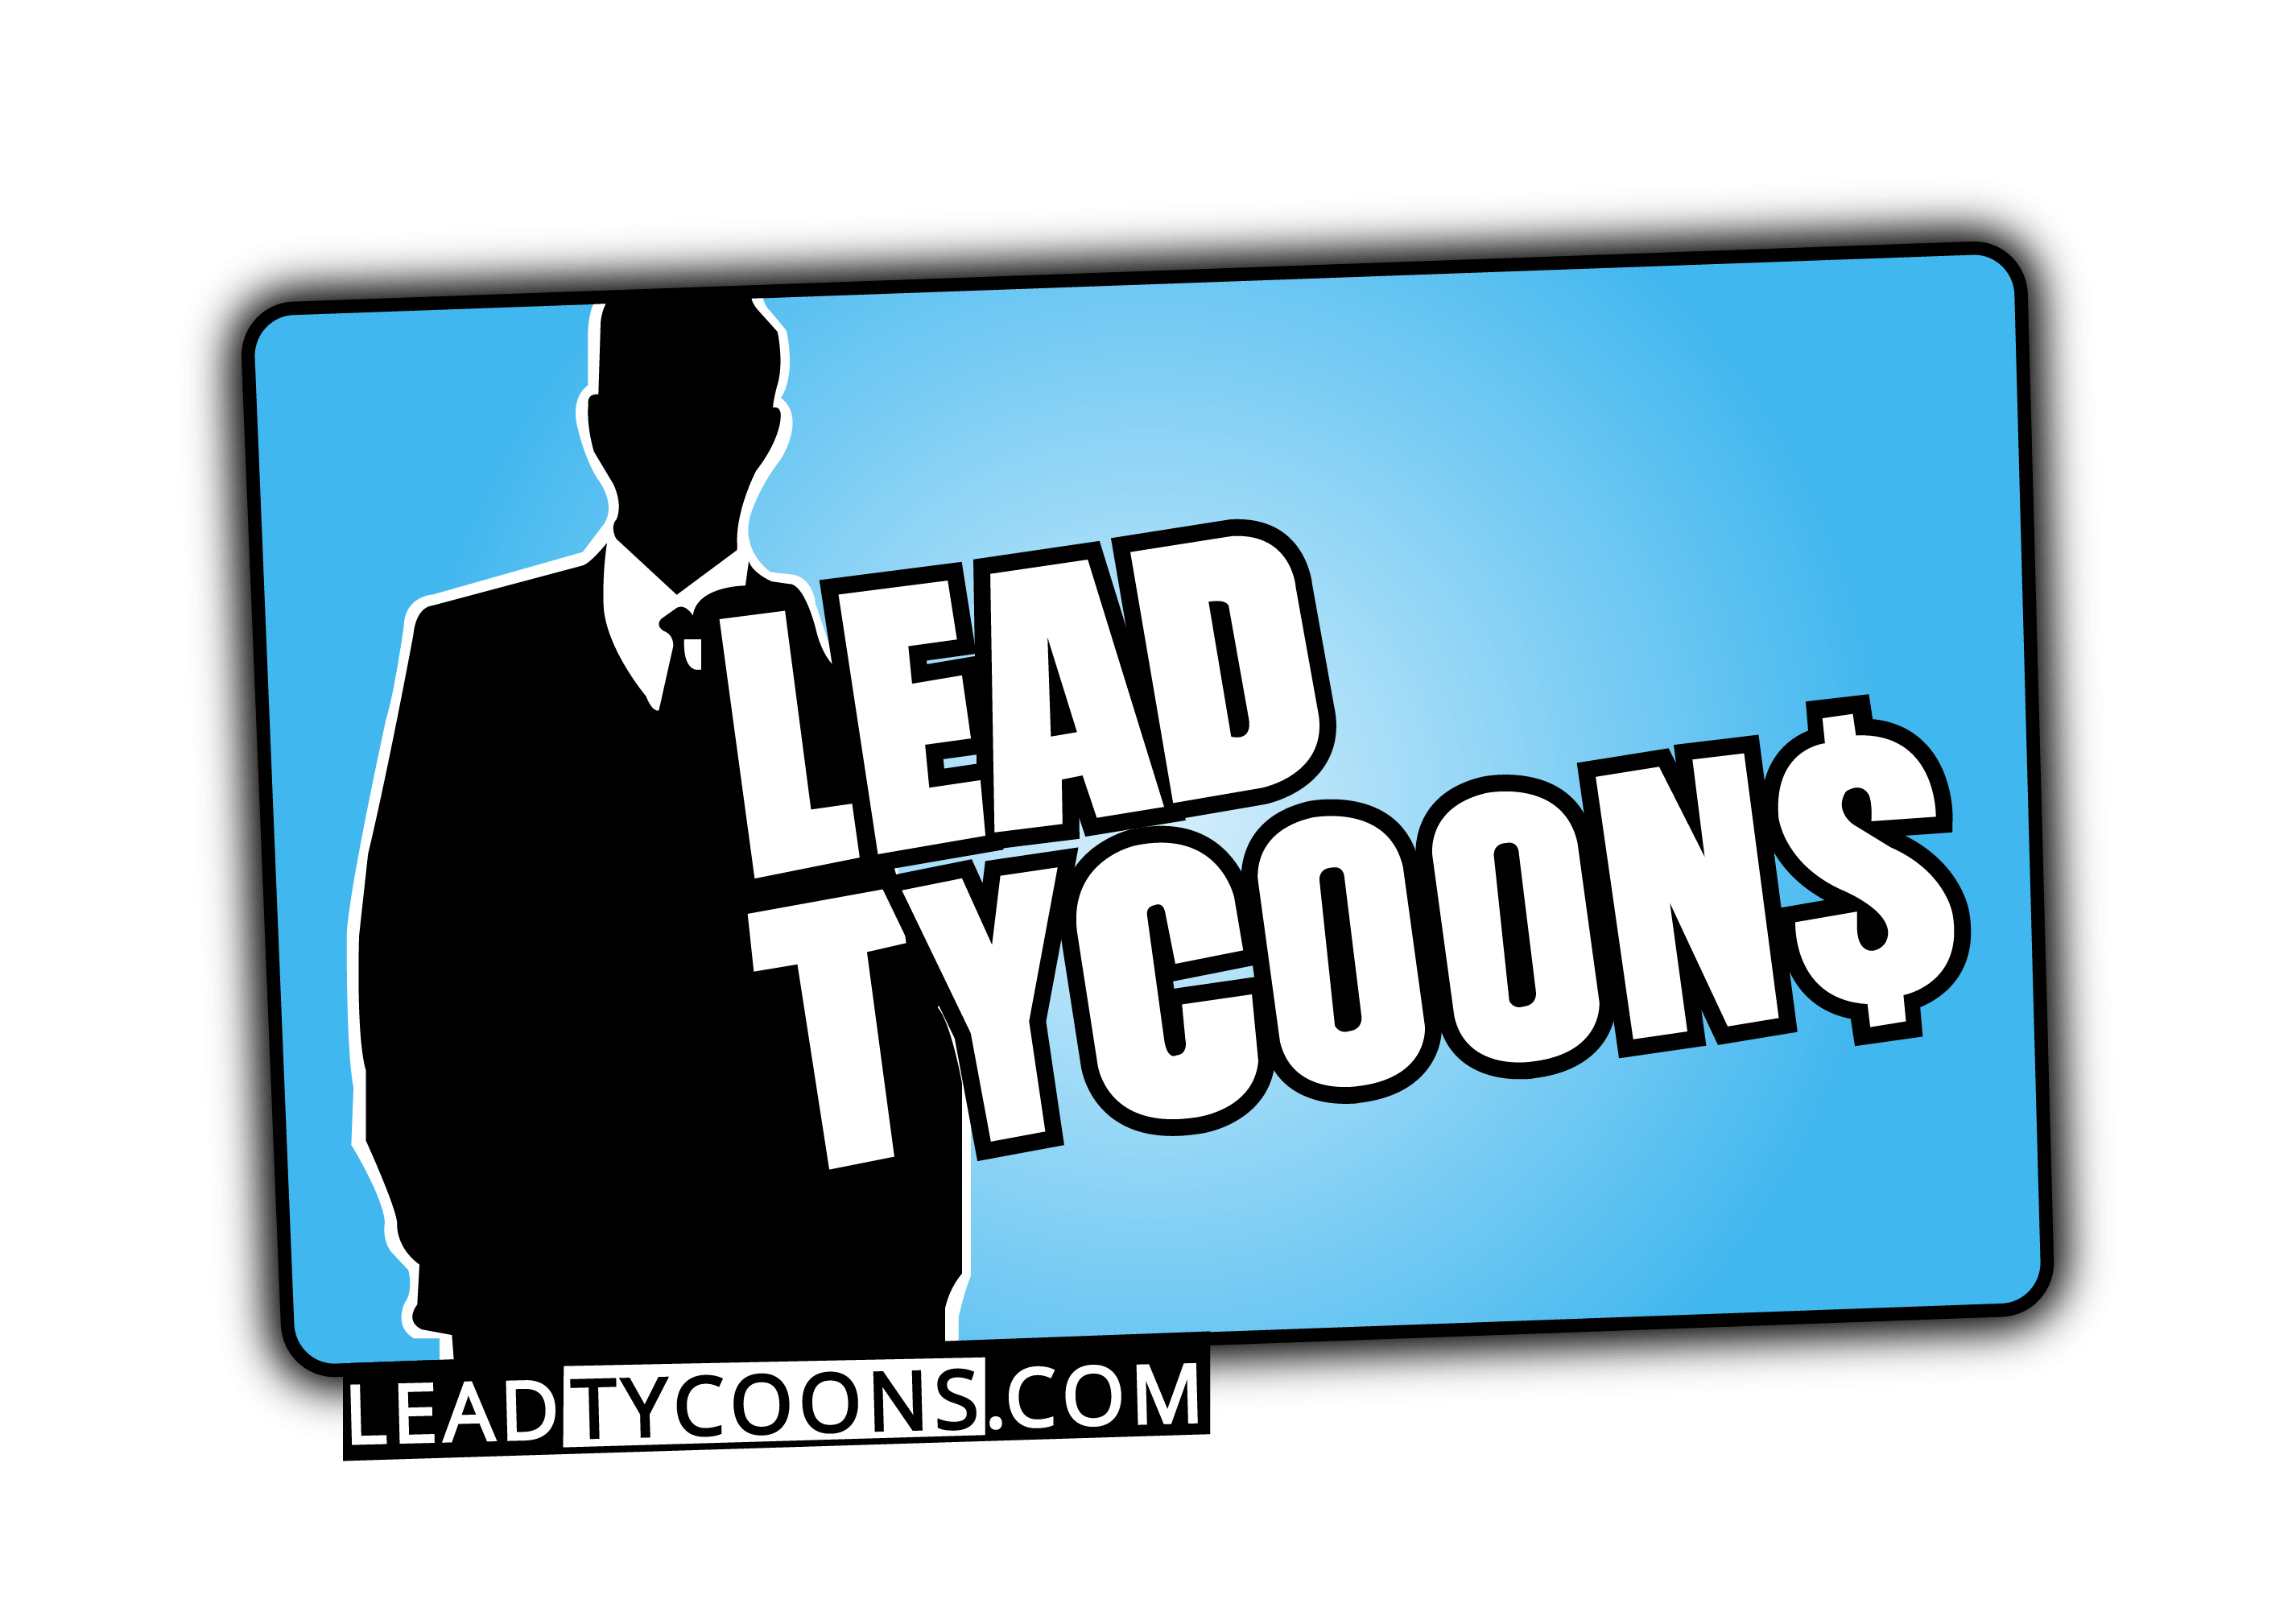 Lead Tycoons an Industry Leading Provider of Lead Generation and Data Services